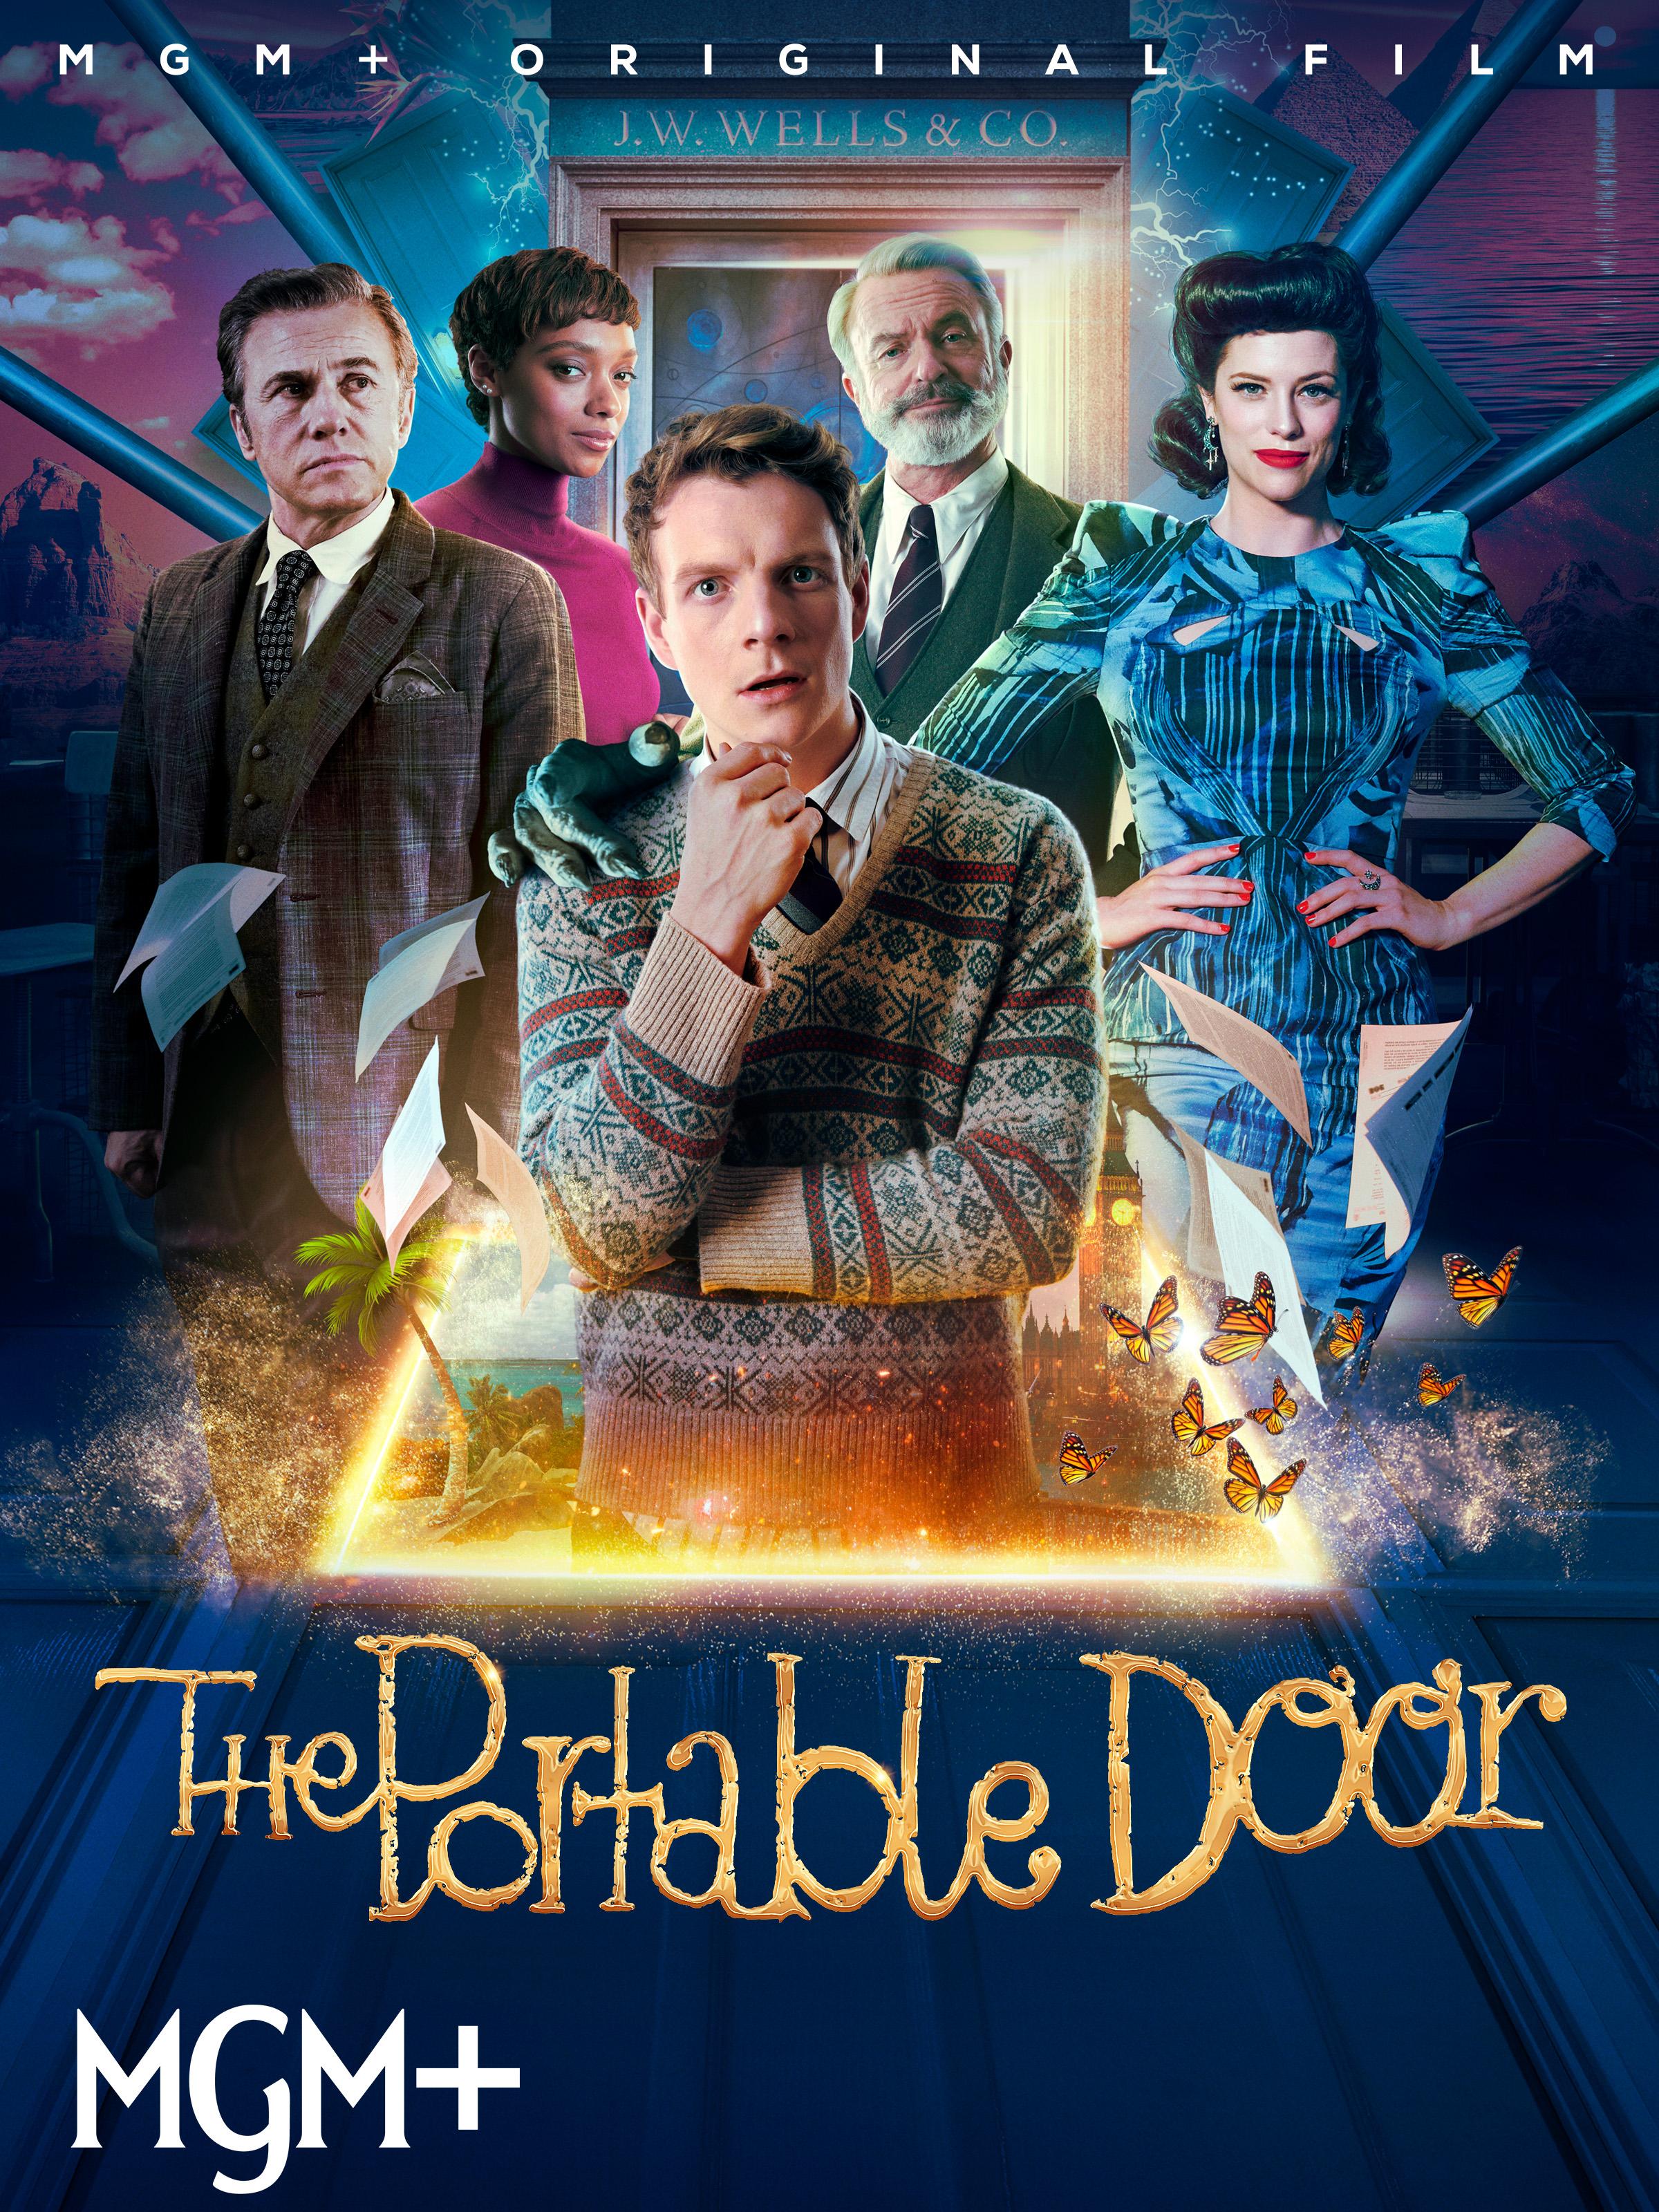 Immerse yourself in this enchanting tale of a man who lands an internship at a mysterious London firm in 'The Portable Door'. What makes this workplace truly unique are its unconventional employees, including a charismatic CEO who blends modern corporate strategy with ancient magical practices.